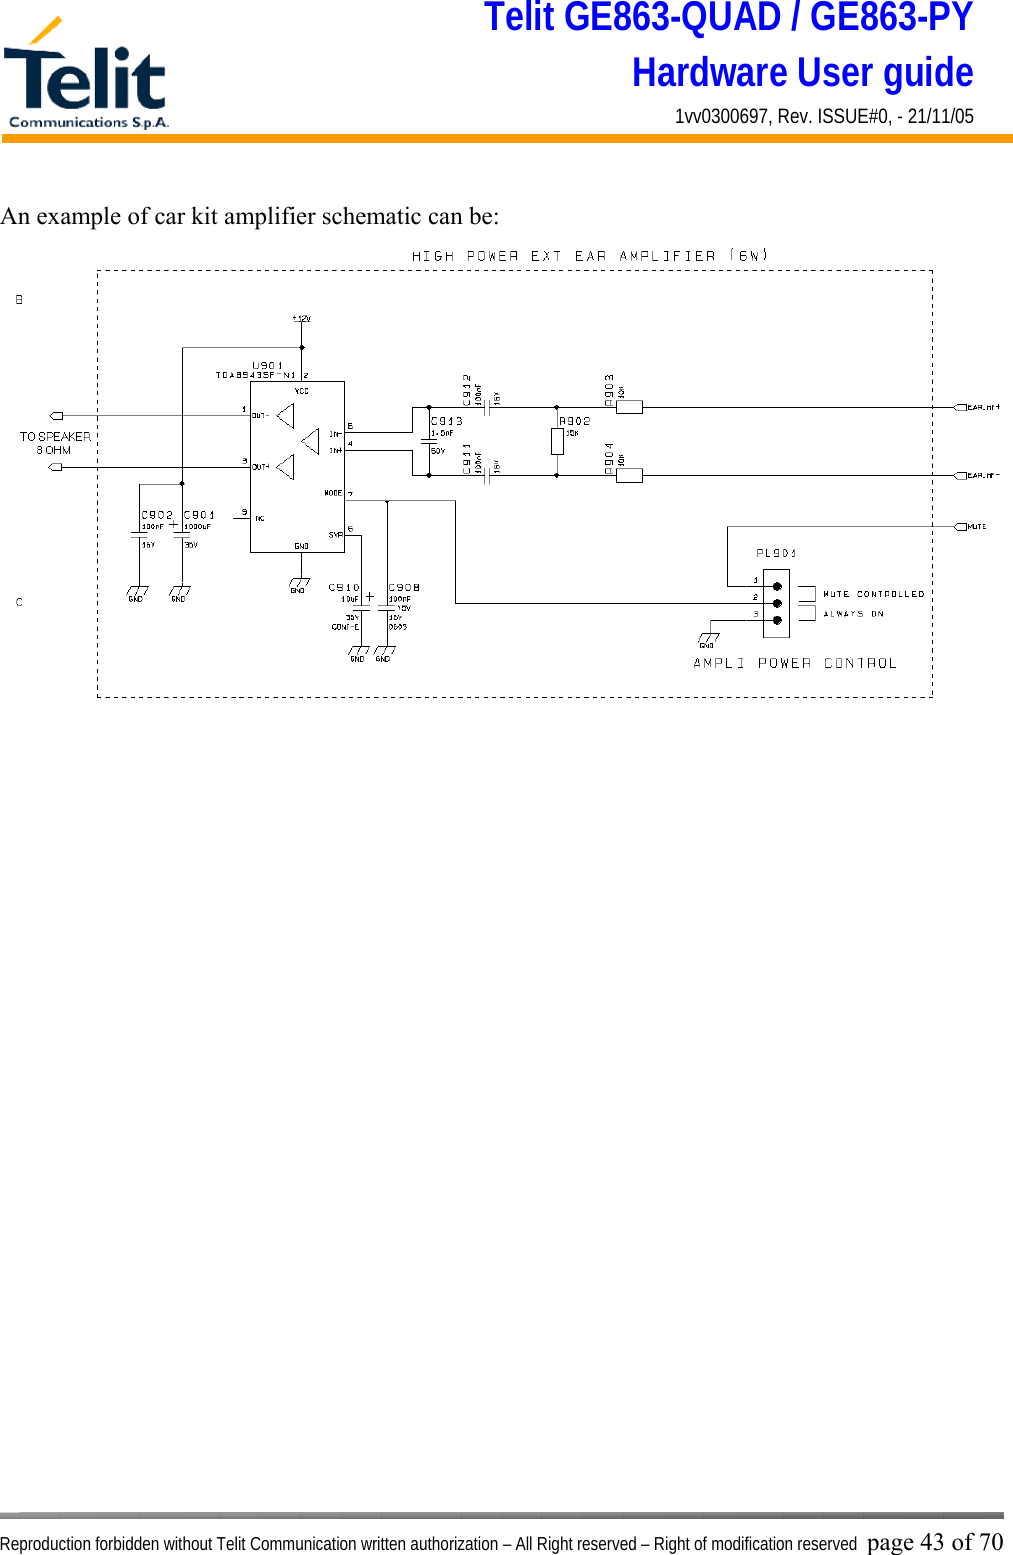 Telit GE863-QUAD / GE863-PY Hardware User guide 1vv0300697, Rev. ISSUE#0, - 21/11/05    Reproduction forbidden without Telit Communication written authorization – All Right reserved – Right of modification reserved page 43 of 70 An example of car kit amplifier schematic can be:   